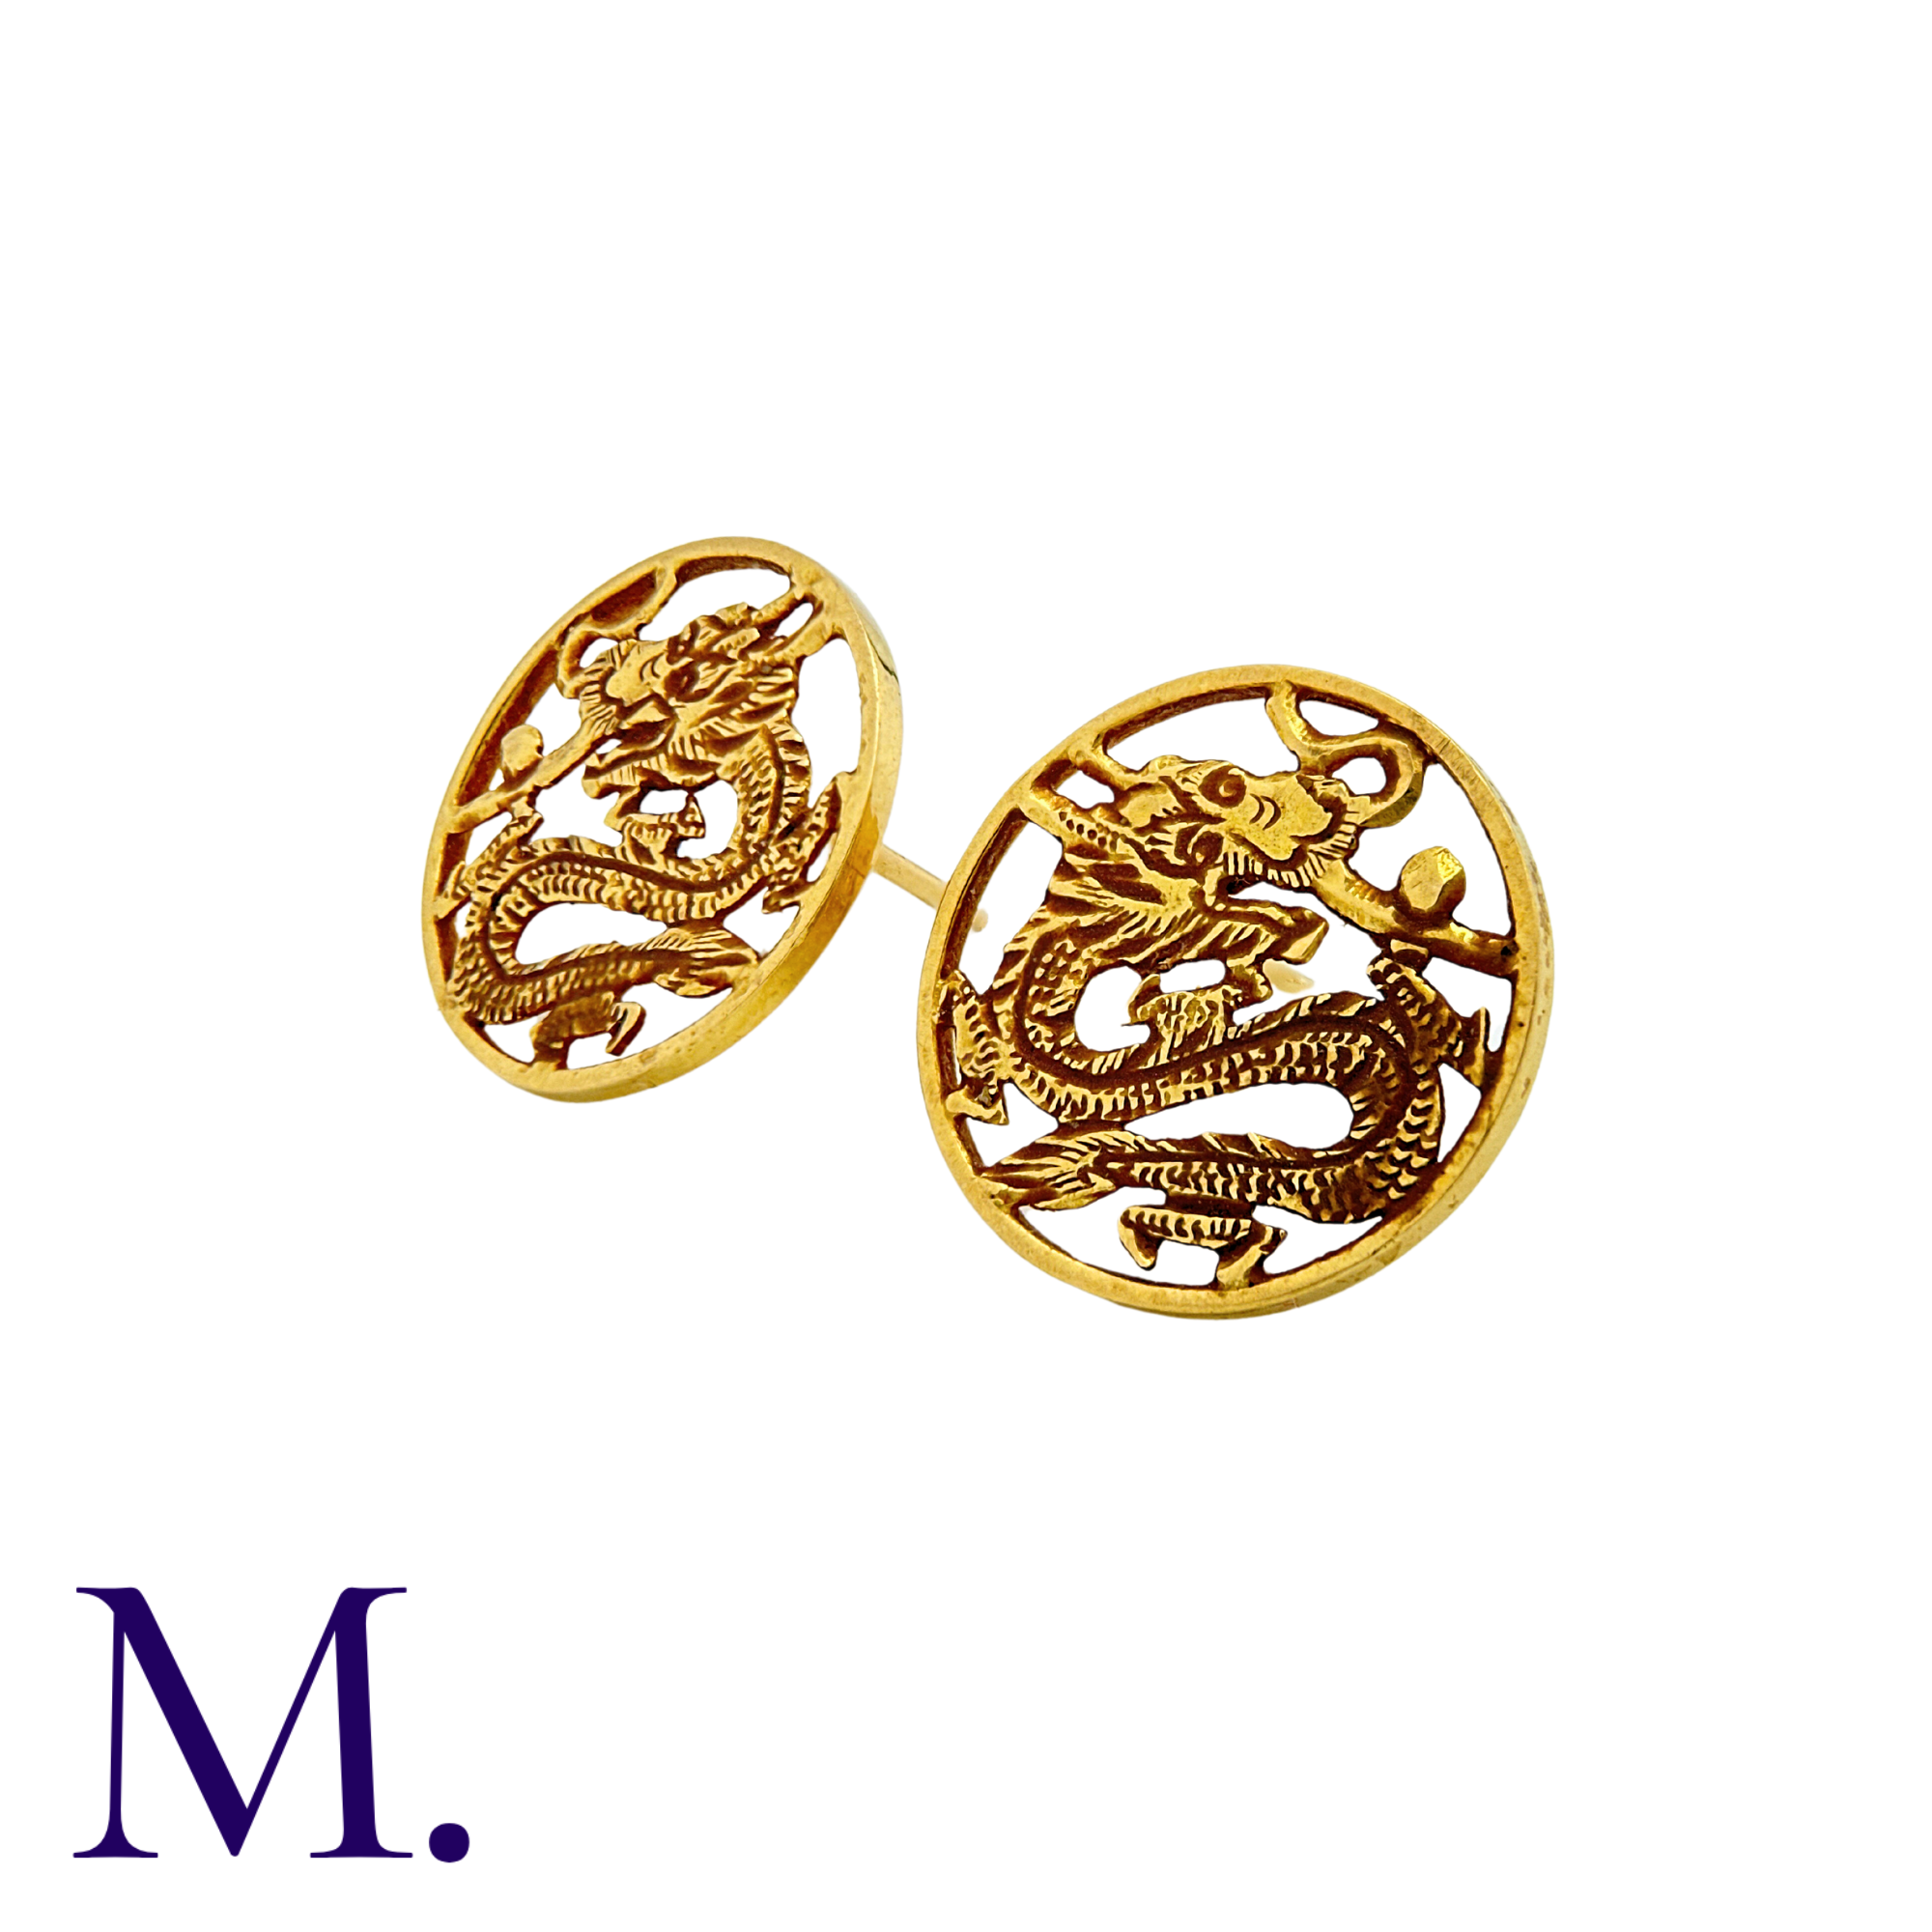 A Pair of Gold Serpent Earrings - Image 3 of 3